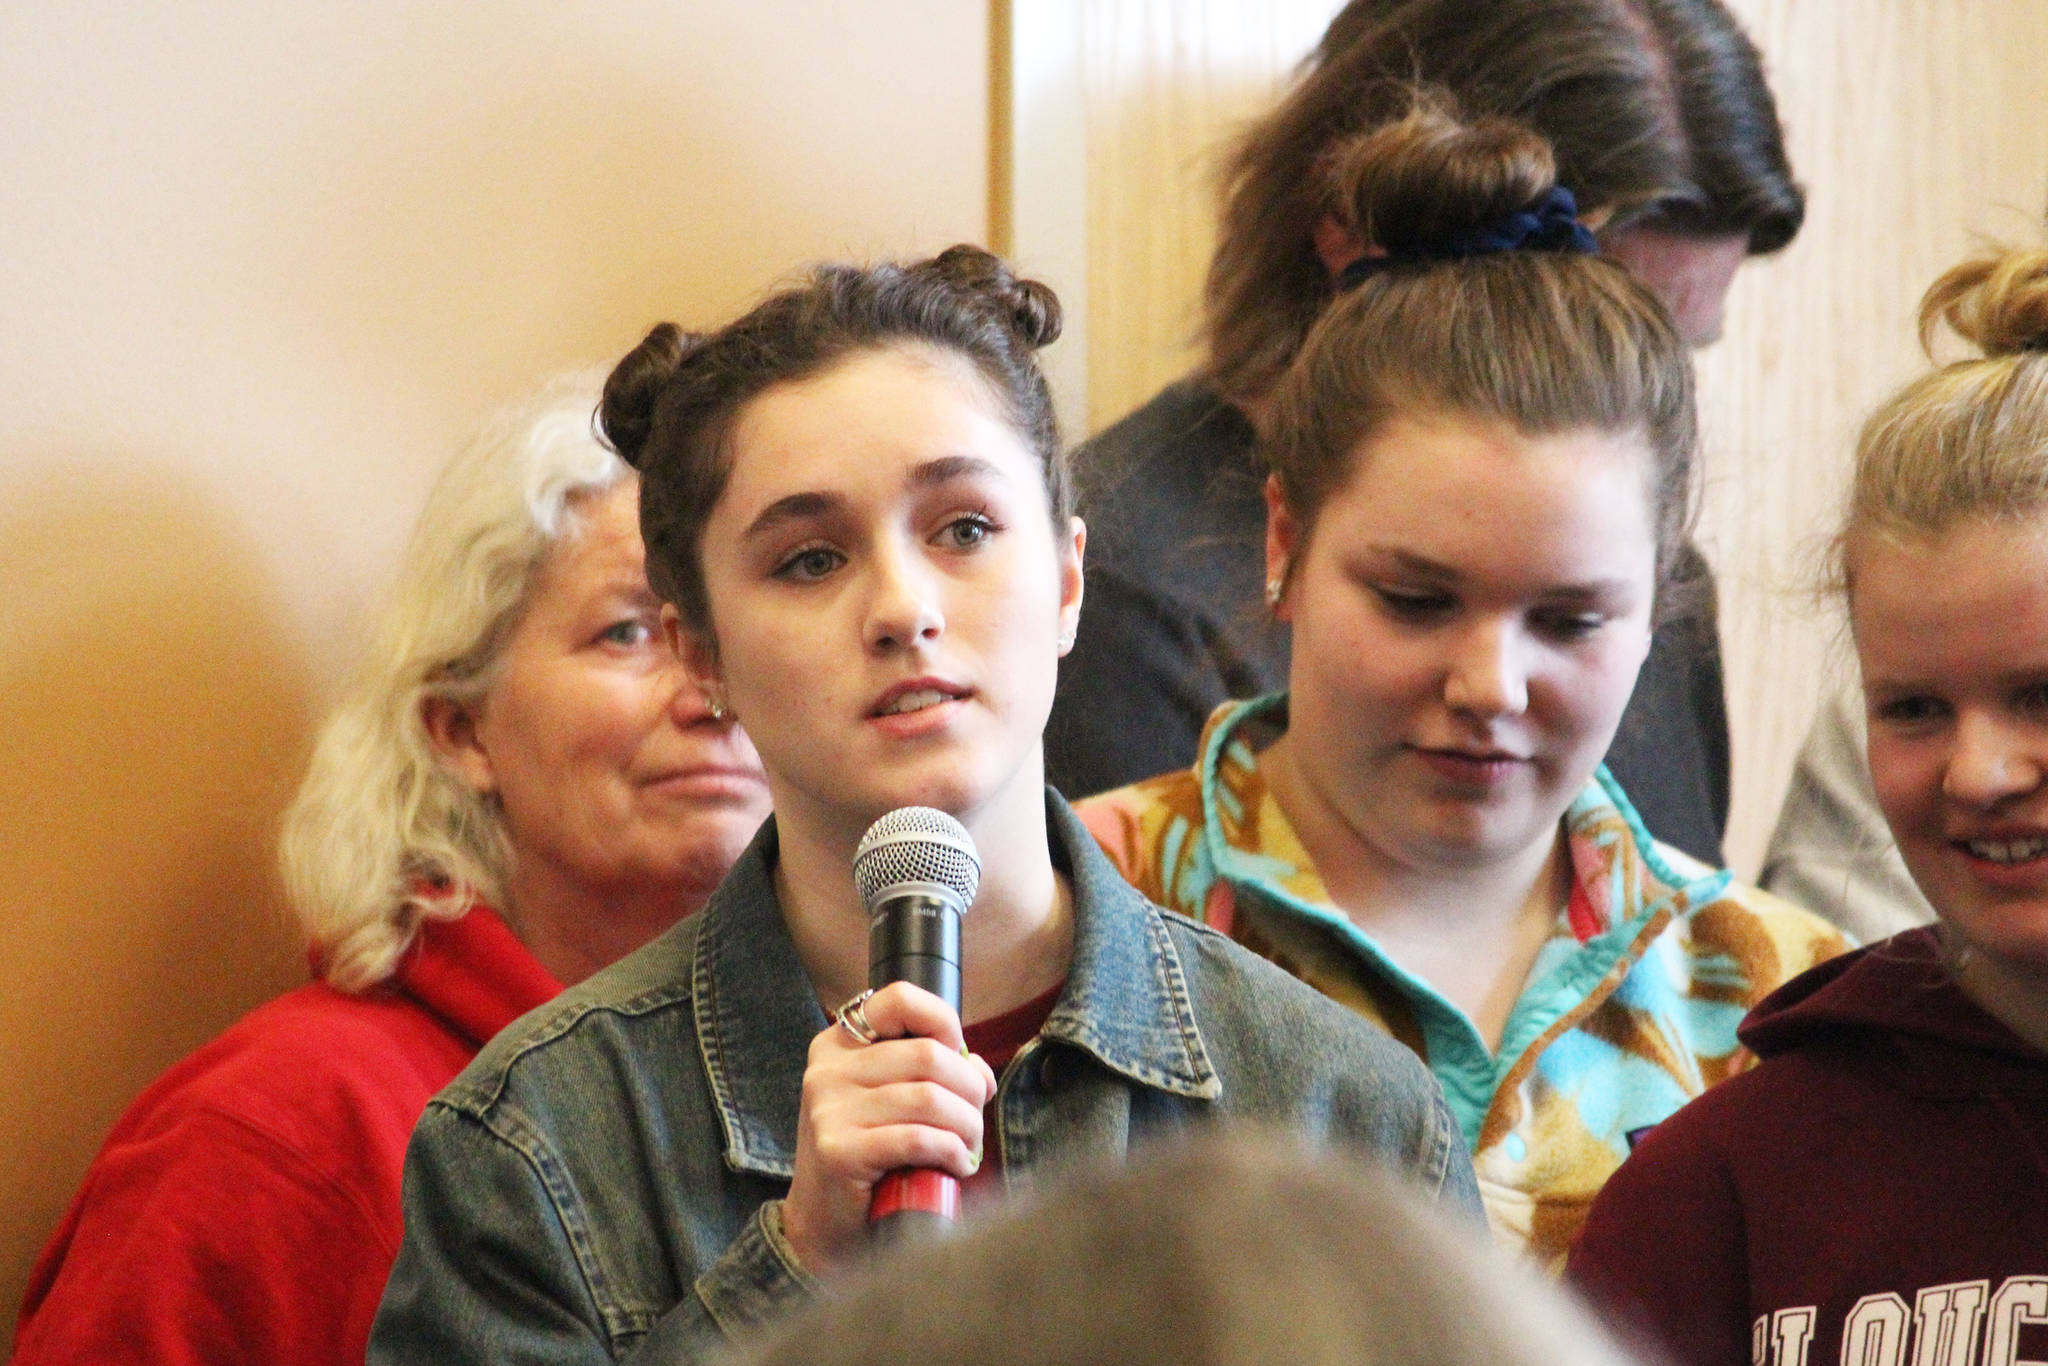 Sophie Morin, a junior at Homer High School, speaks to Rep. Sarah Vance (R-Homer) at a town hall meeting Saturday, March 2, 2019 at Kachemak Bay Campus in Homer, Alaska. Several students from the high school and the college spoke in defense of state funding for their educations. (Photo by Megan Pacer/Homer News)